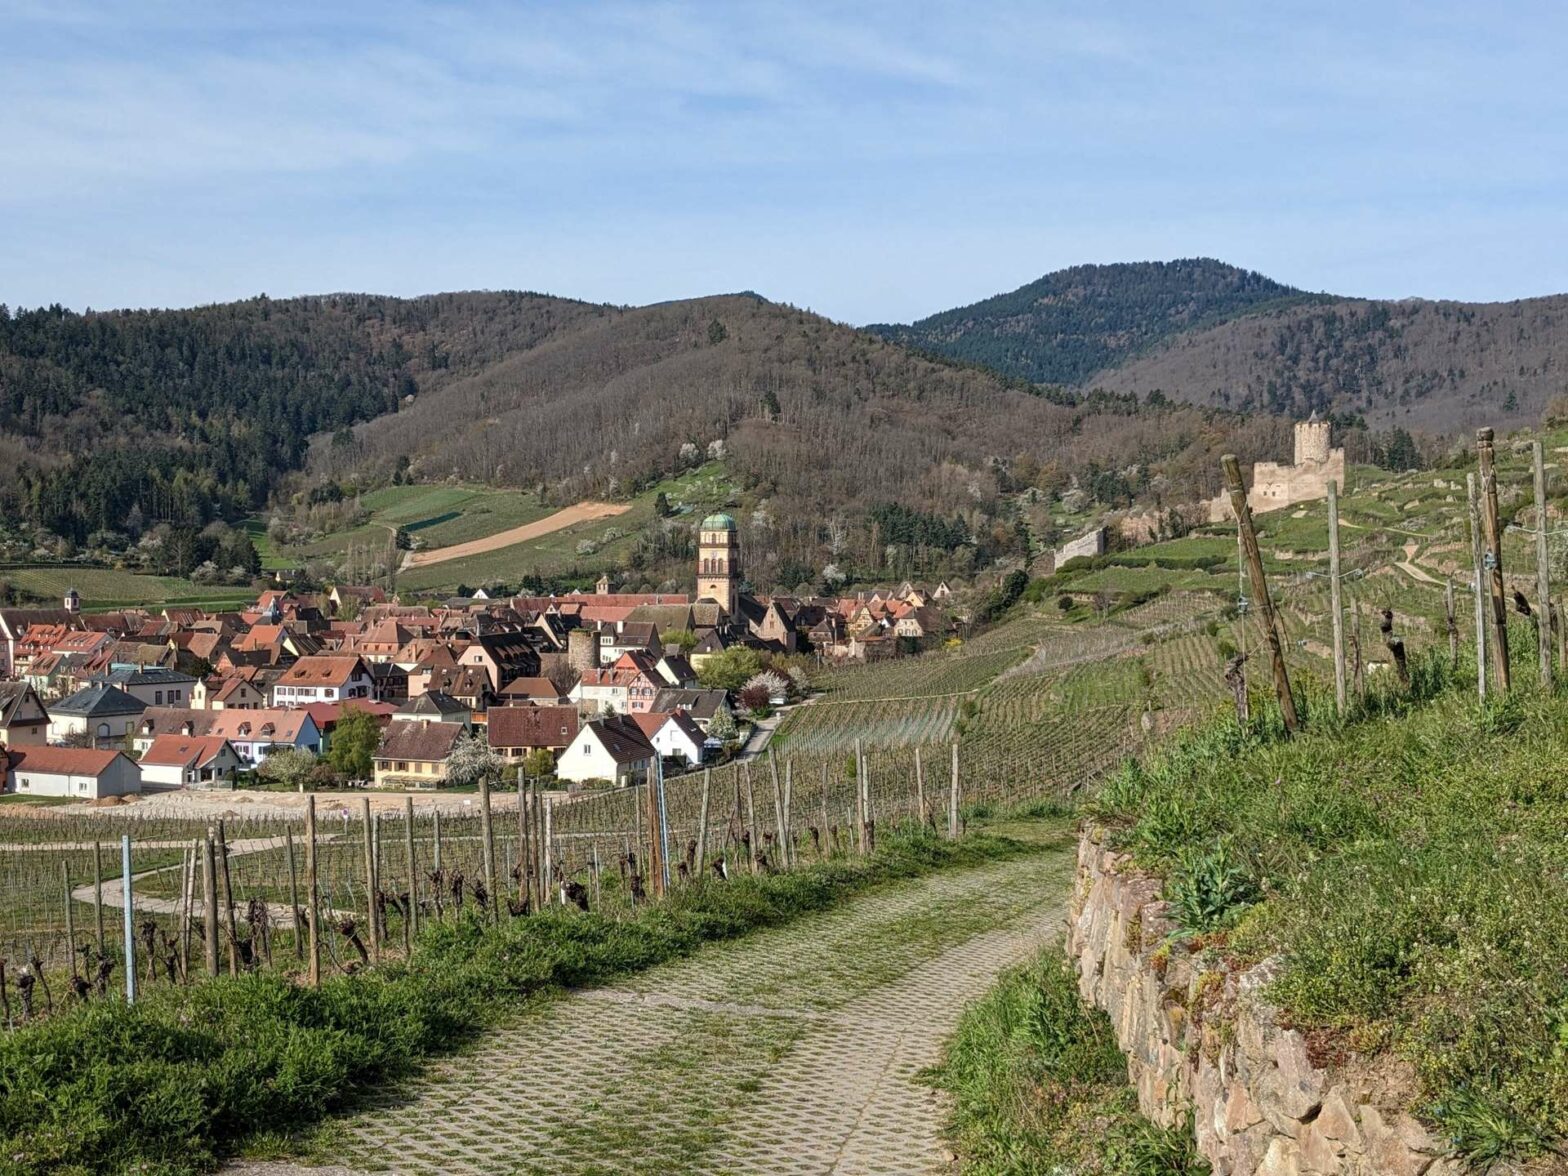 View of Kayserberg and the Château de Kaysersberg